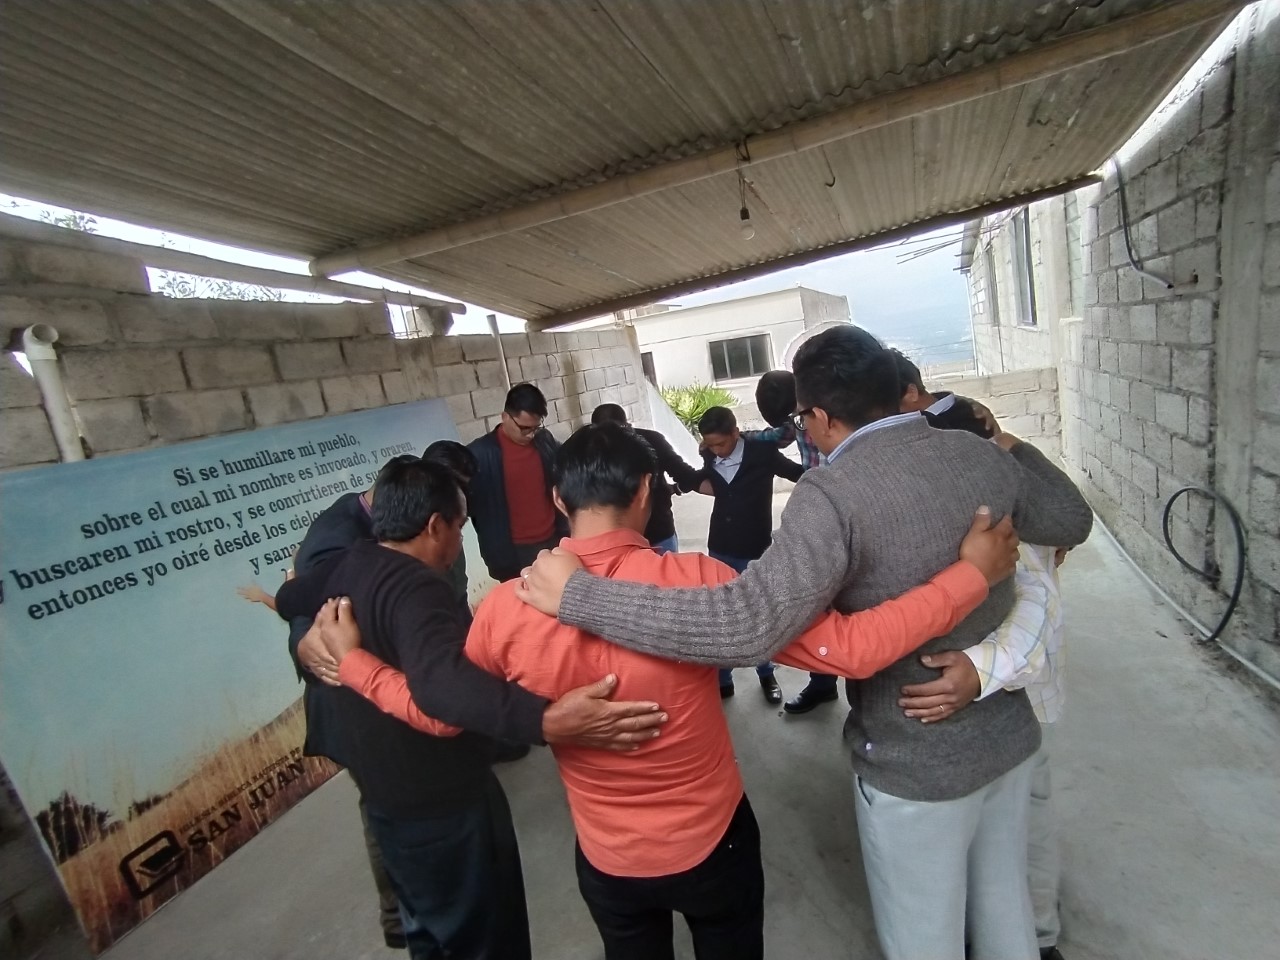 Gabriel Macancela prays with a group of believers